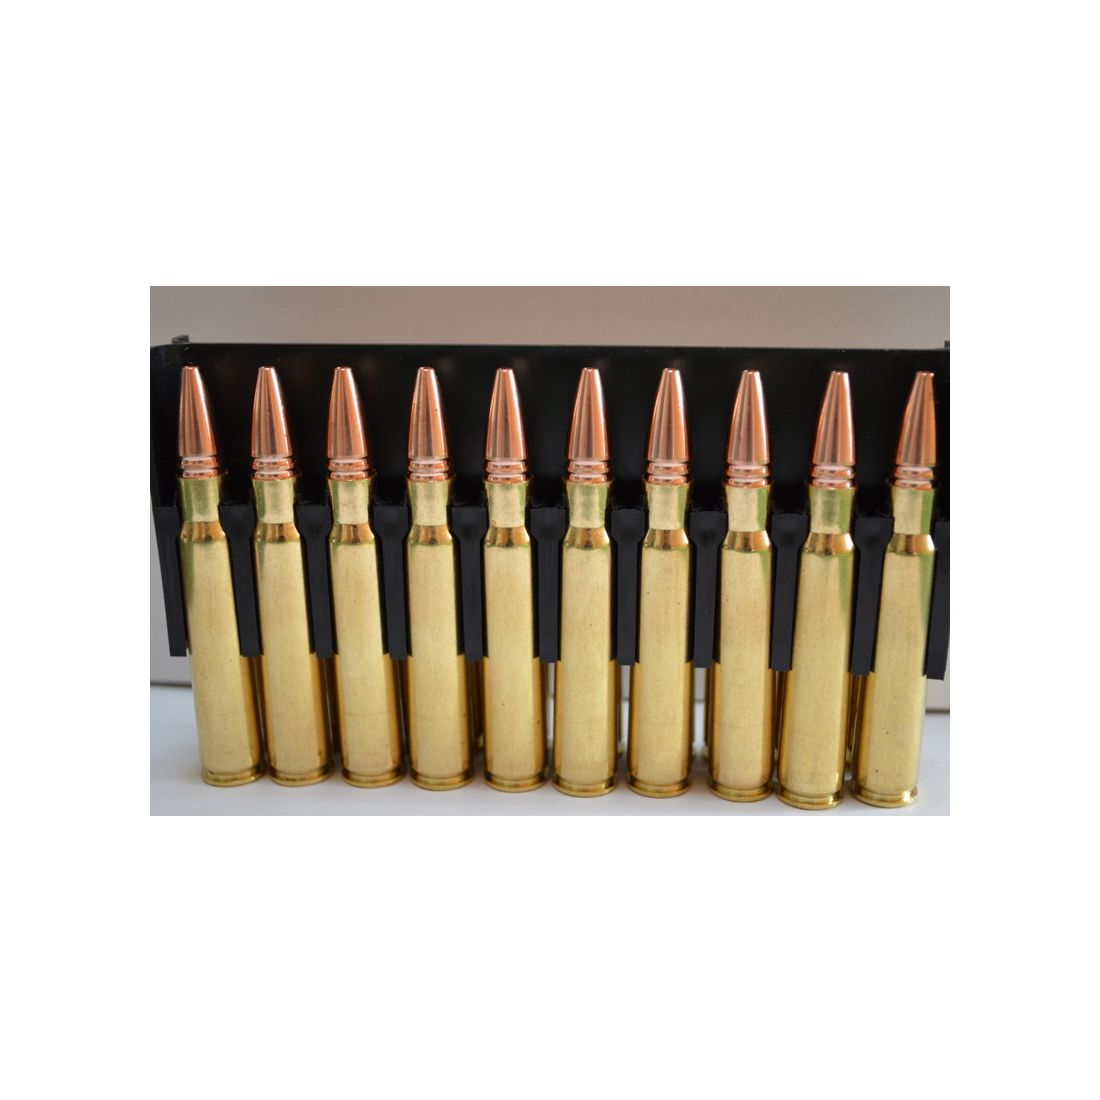 8x57 IS - 145gr Aero (RS) 50 Stück Packung